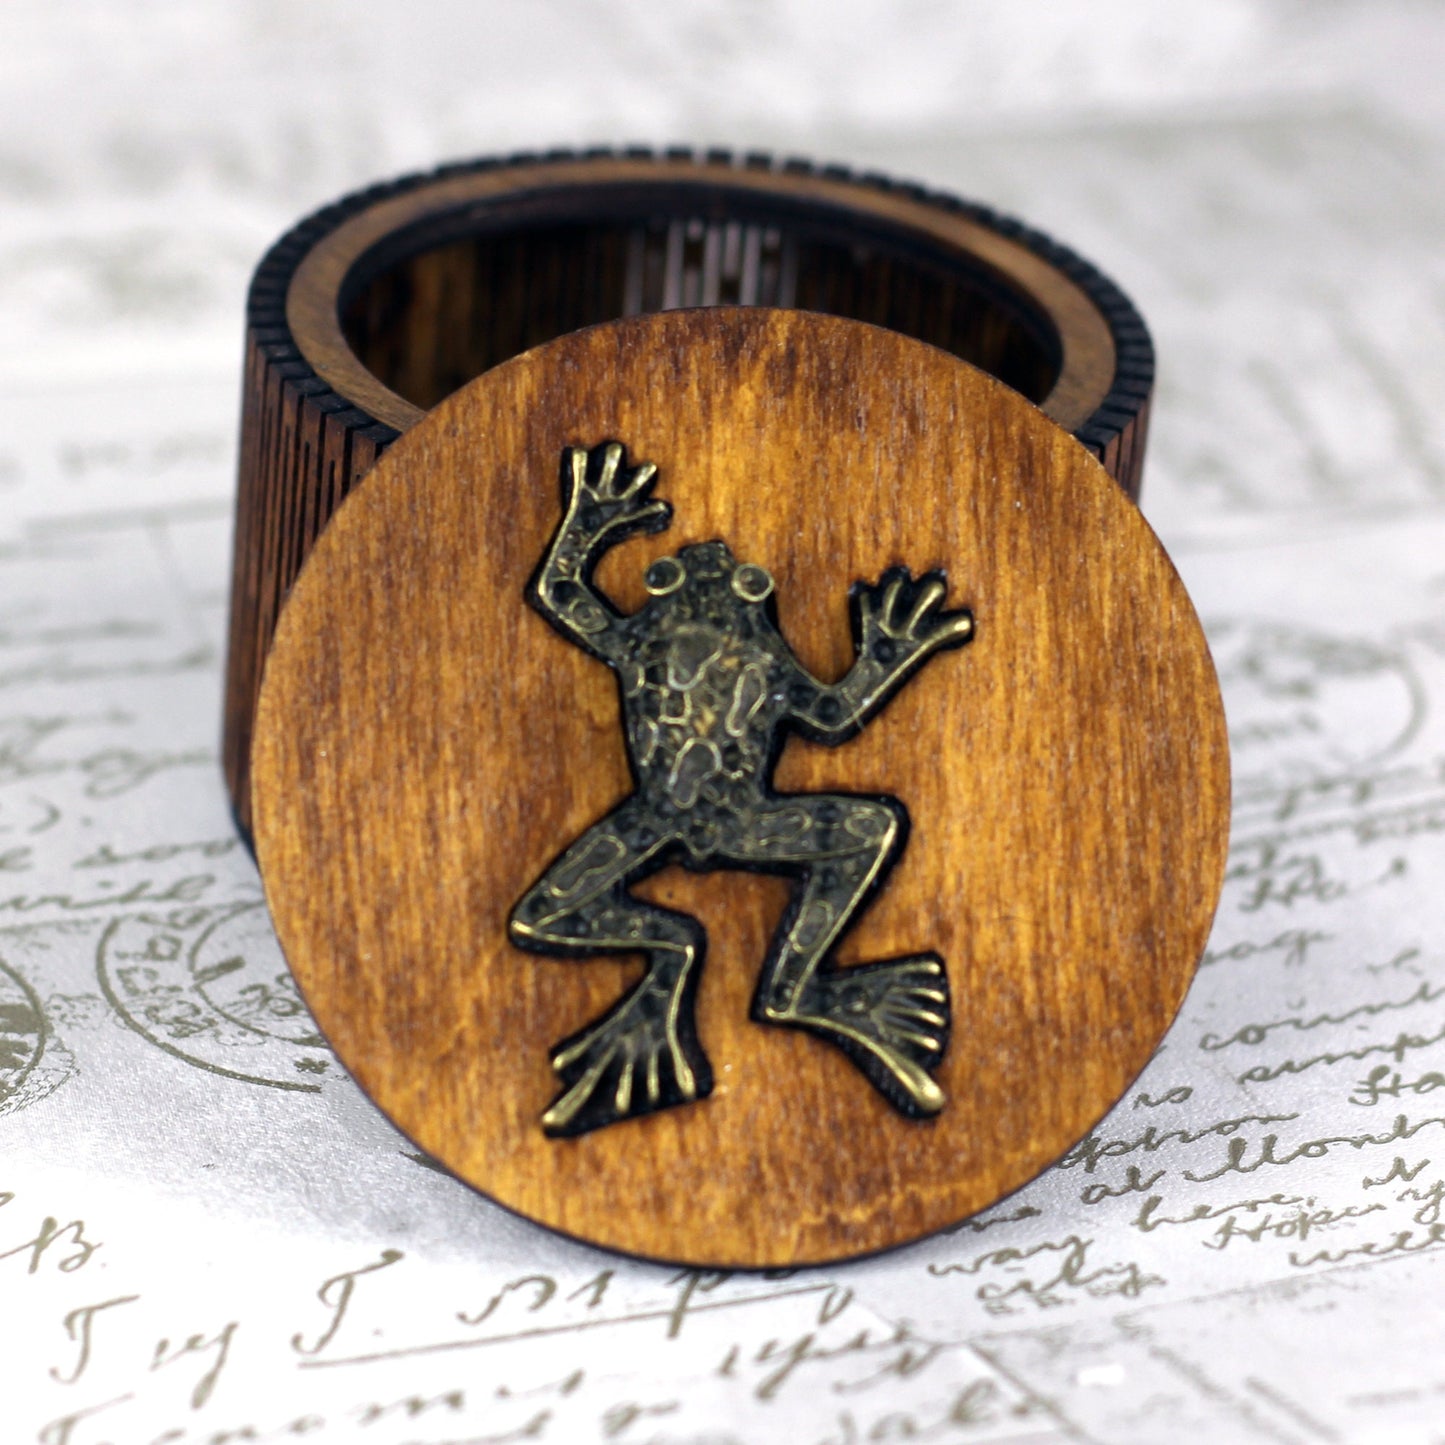 Personalised wooden keepsake box with frog charm lid and living hinge side, gothic jewellery box, Victorian style custom trinket